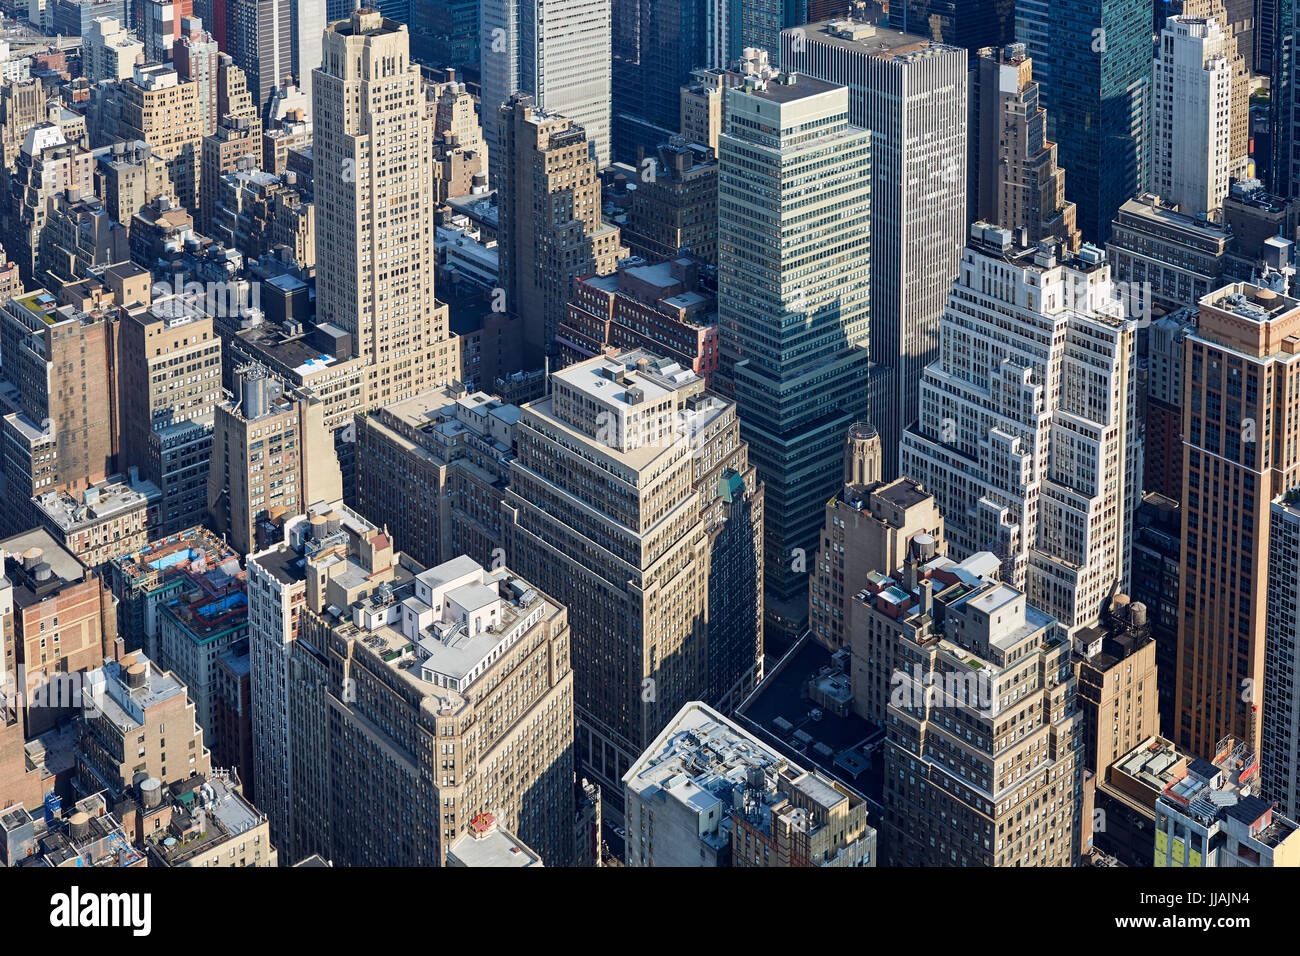 New York City Manhattan skyline aerial view with skyscrapers and streets Stock Photo